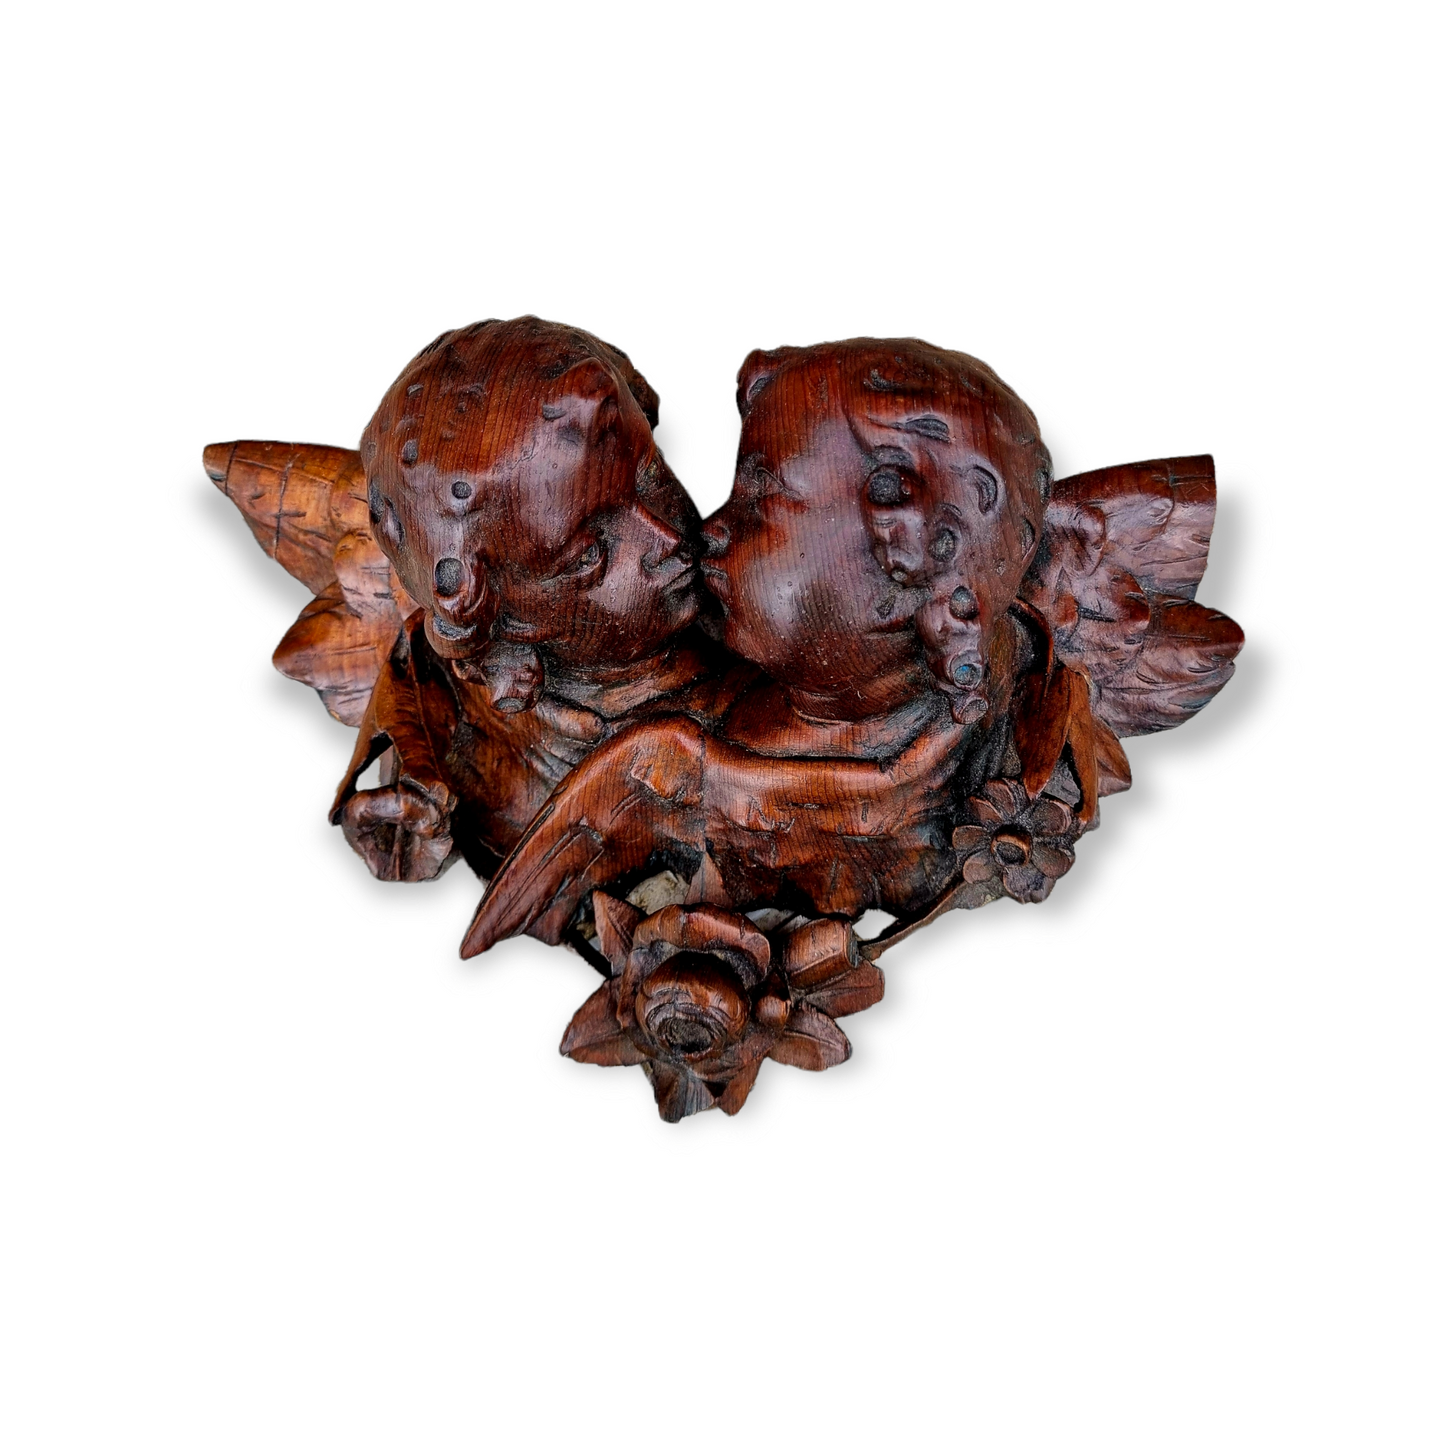 Decorative 19th Century Antique Carved Pine Depiction of Two Winged Cherubs / Putti Kissing